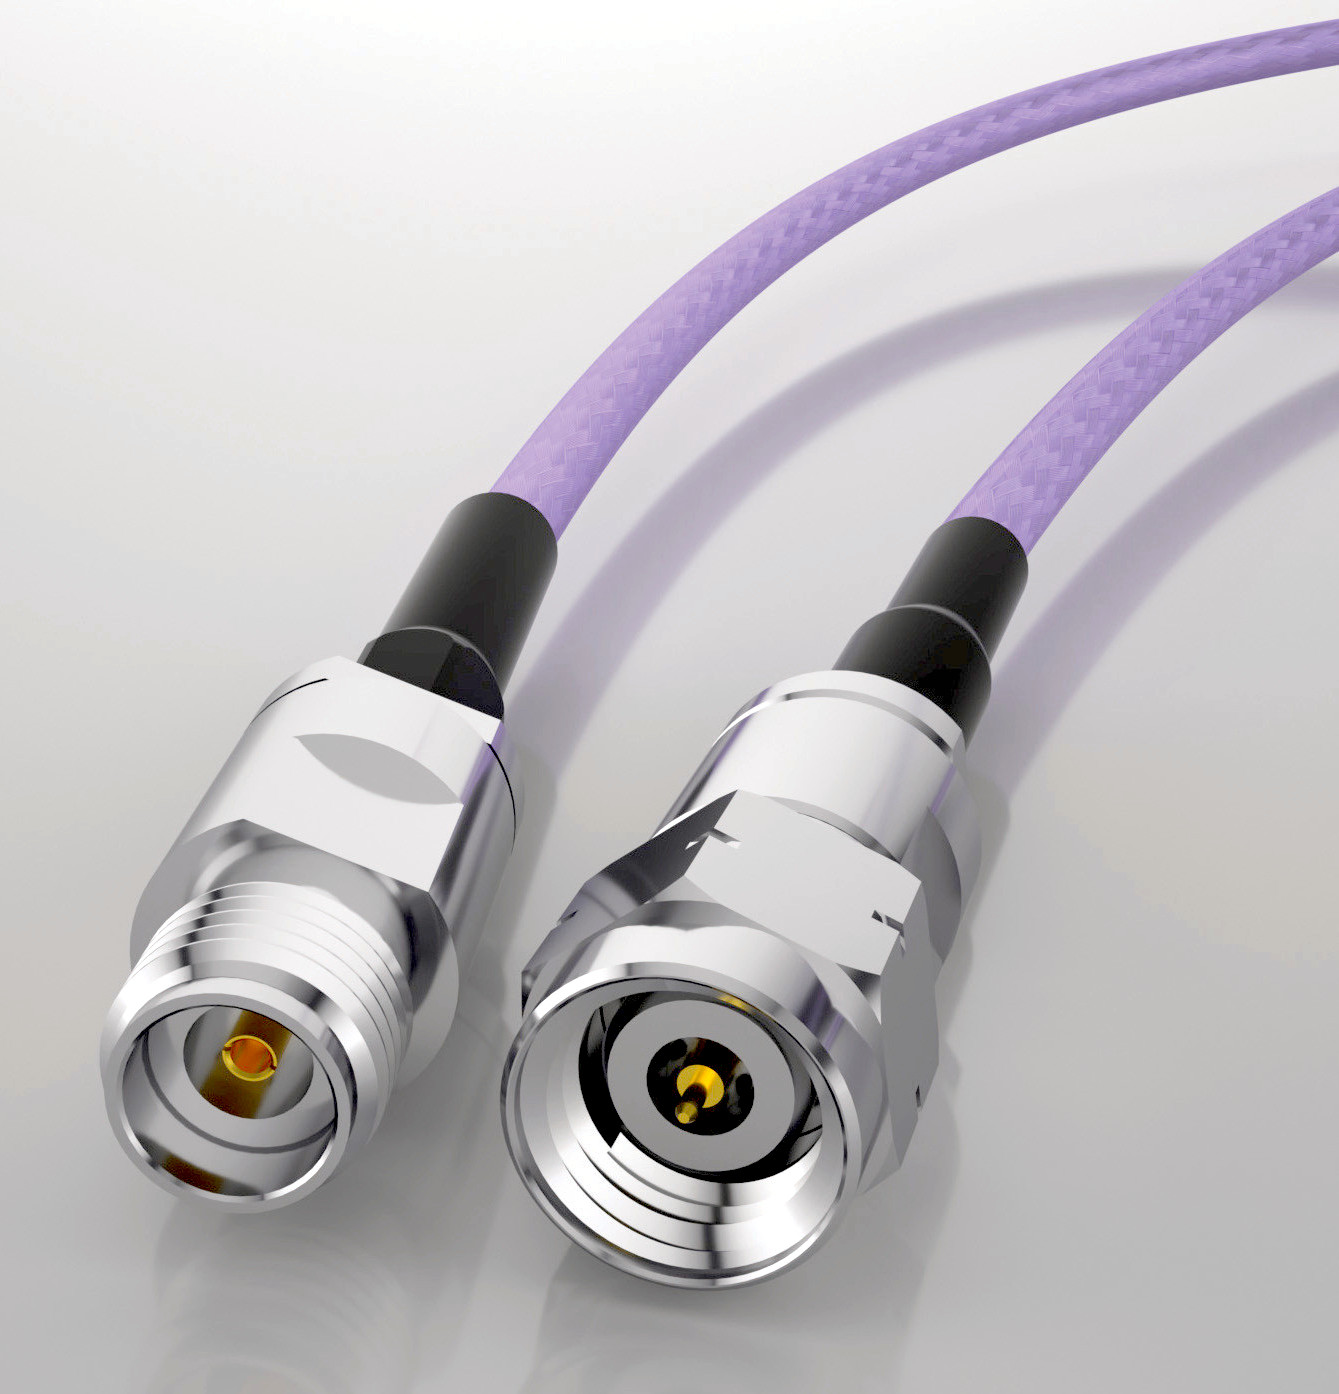 Microwave and Millimeter-Wave RF Connectors Product Roundup